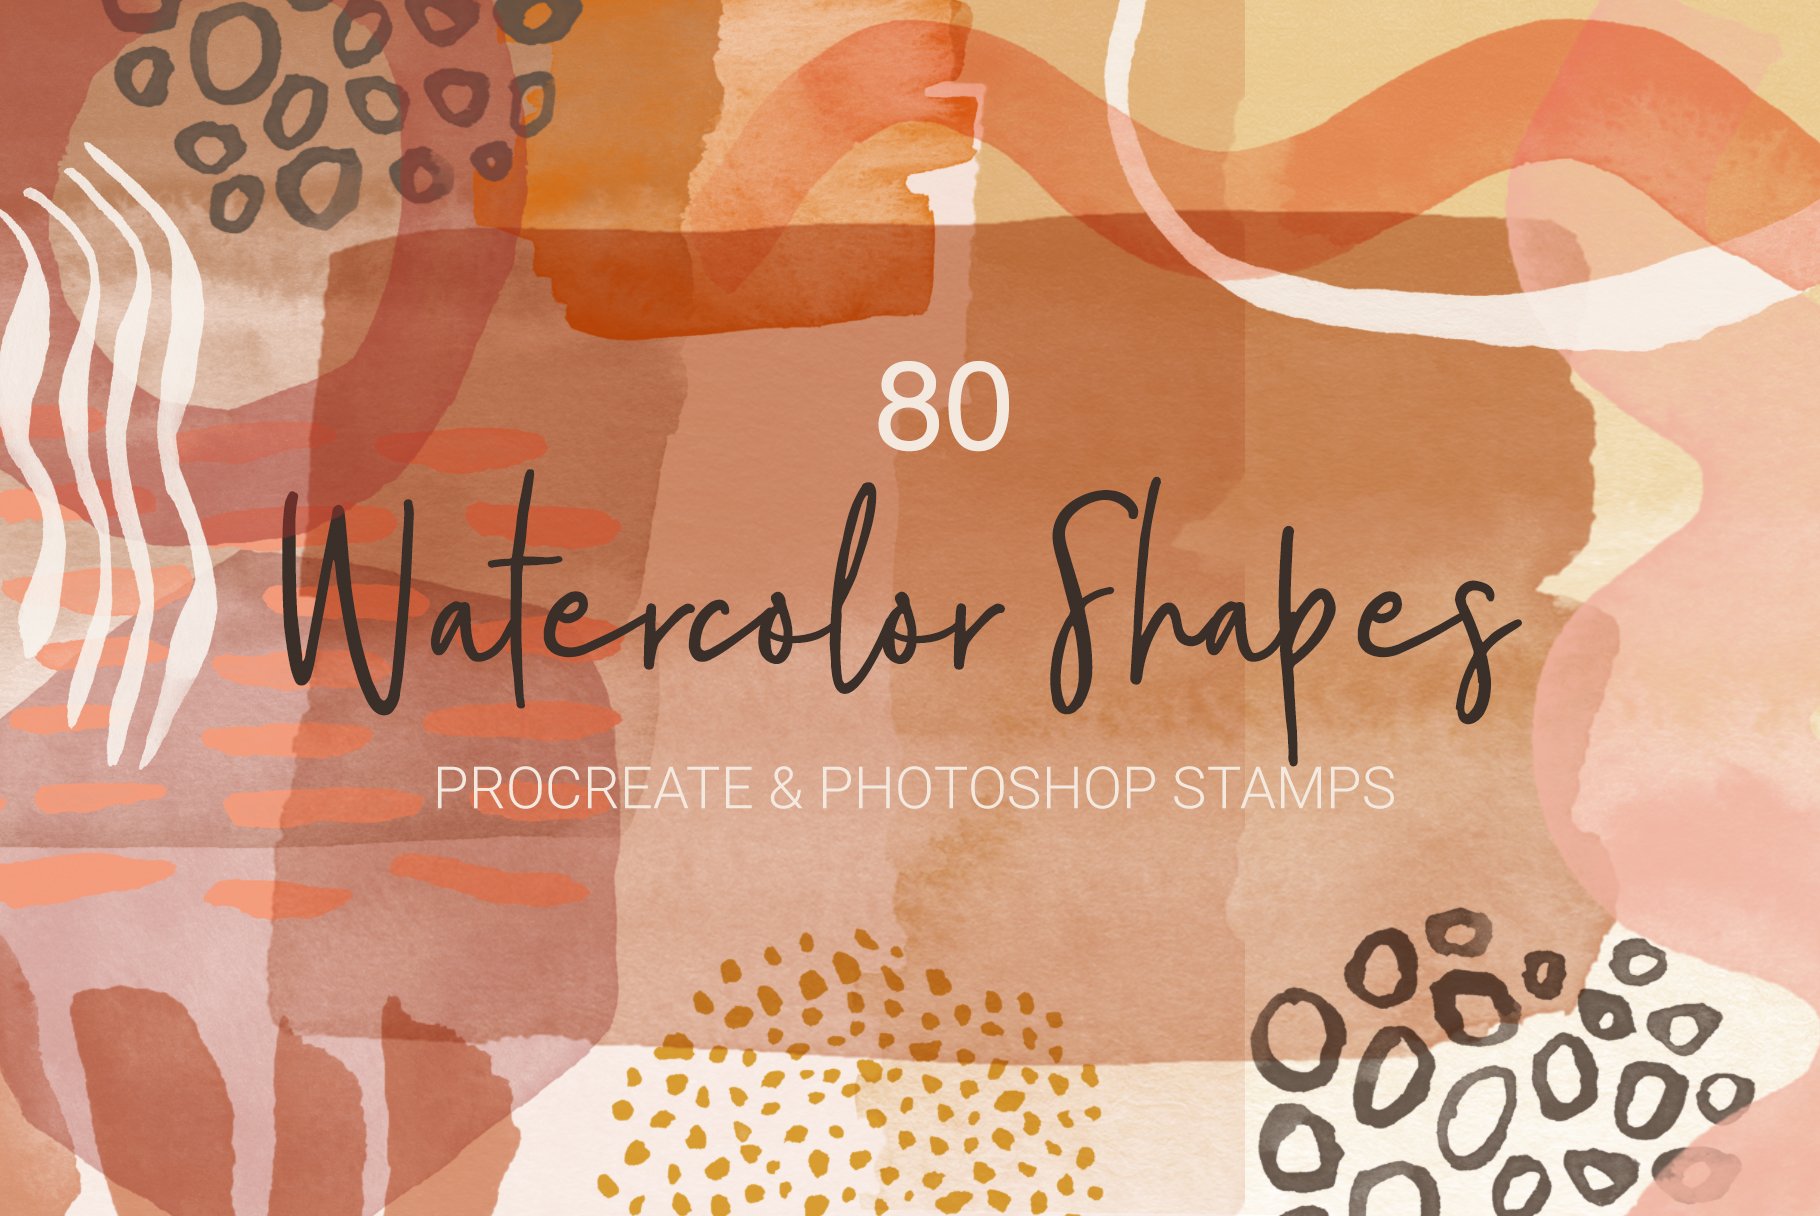 Watercolor Shapes for Procreate & PScover image.